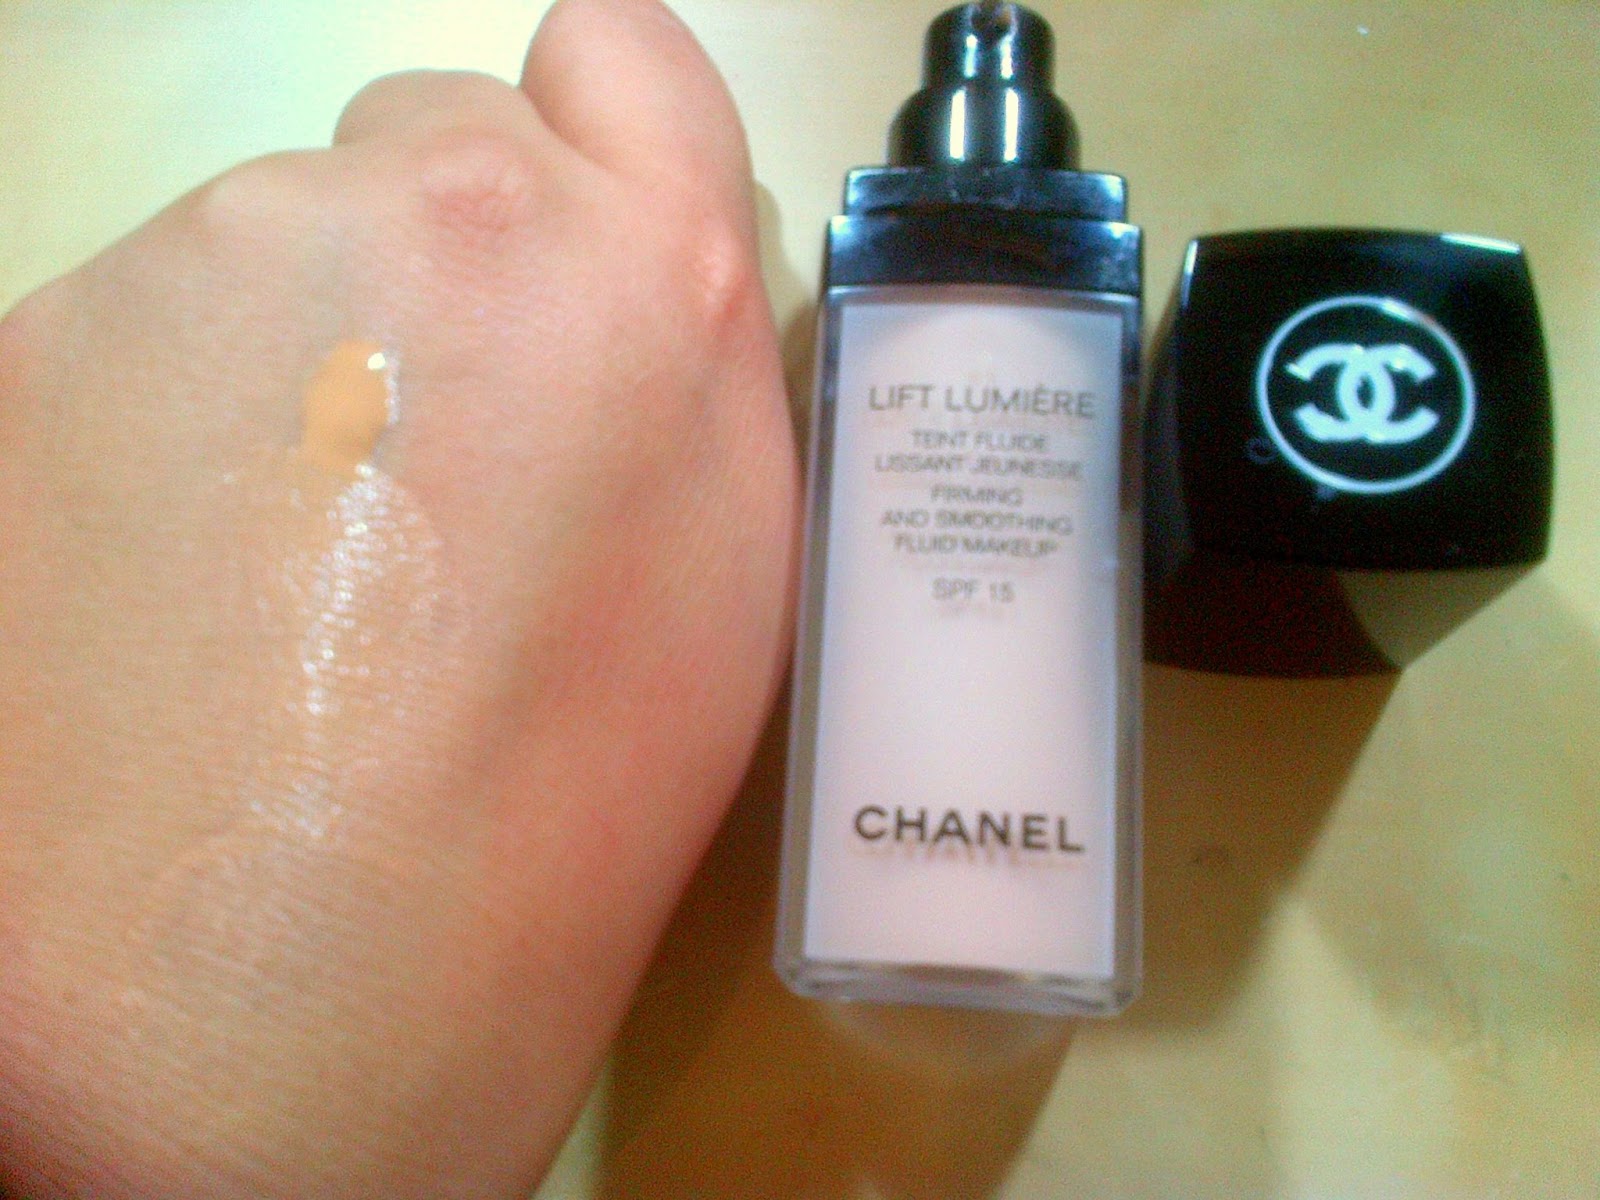 Farhana J's Blog: Review: CHANEL LIFT LUMIÈRE Firming And Smoothing Fluid  Makeup